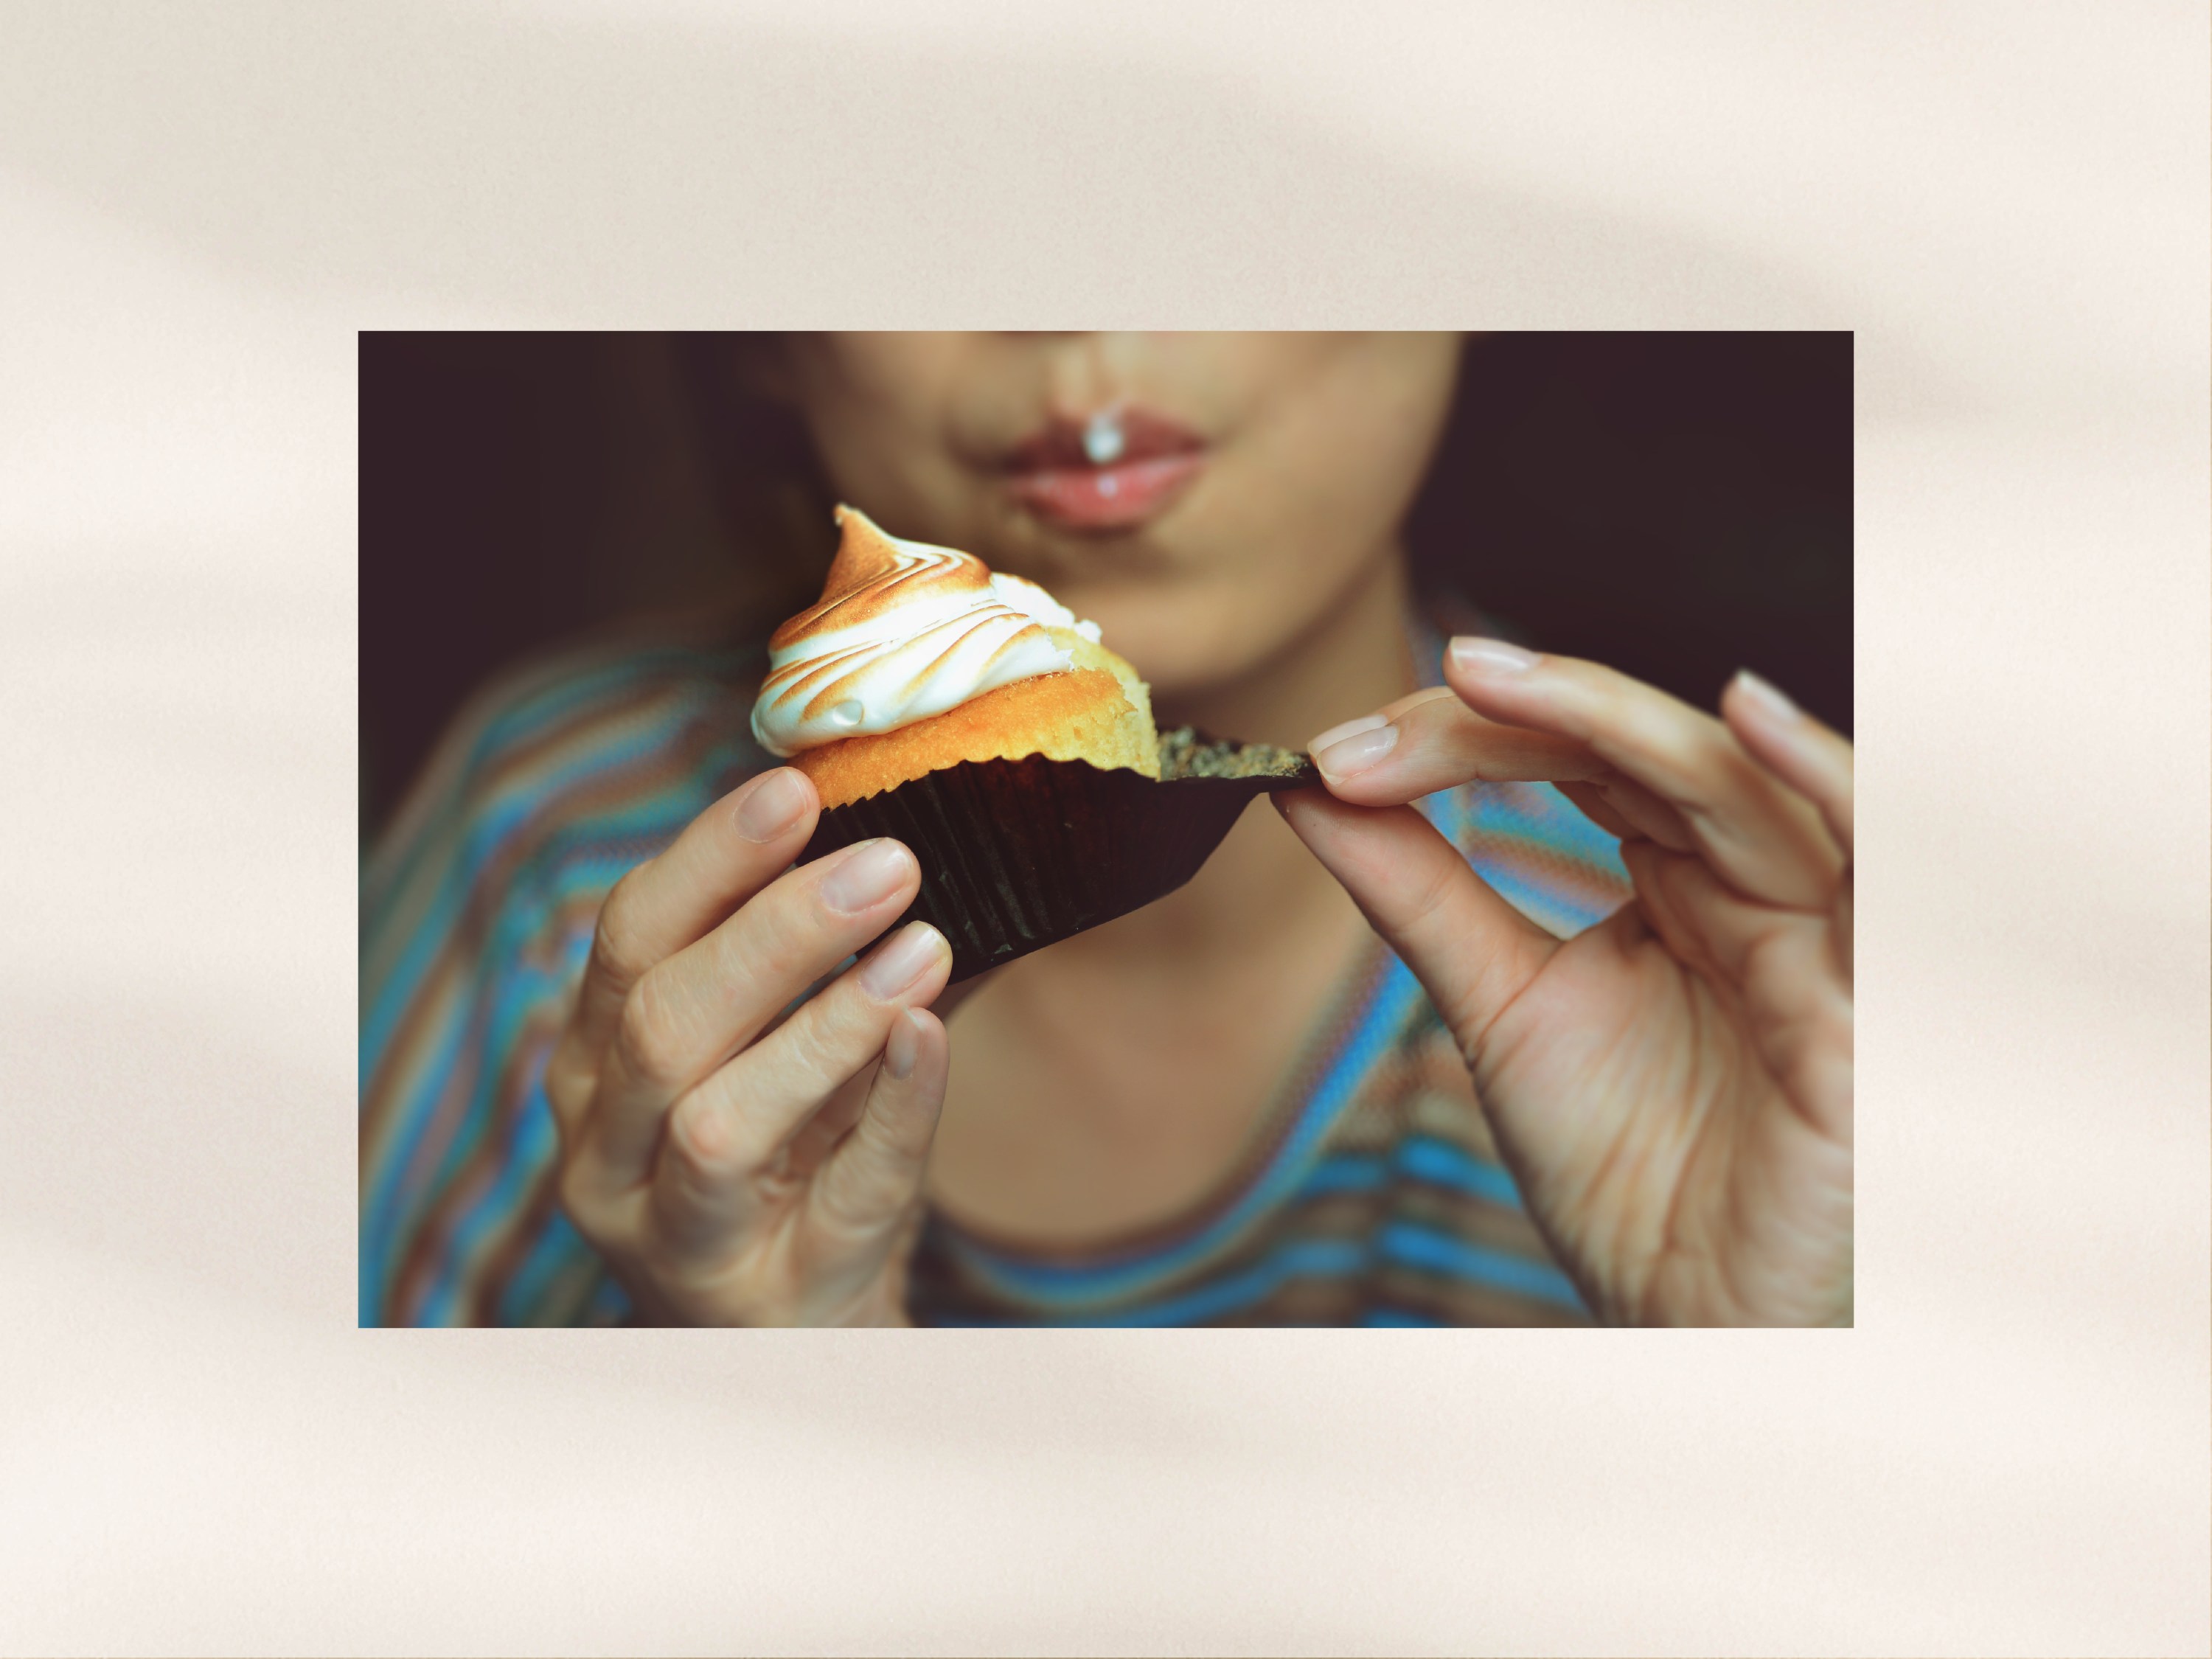 Young woman eating a cupcake.